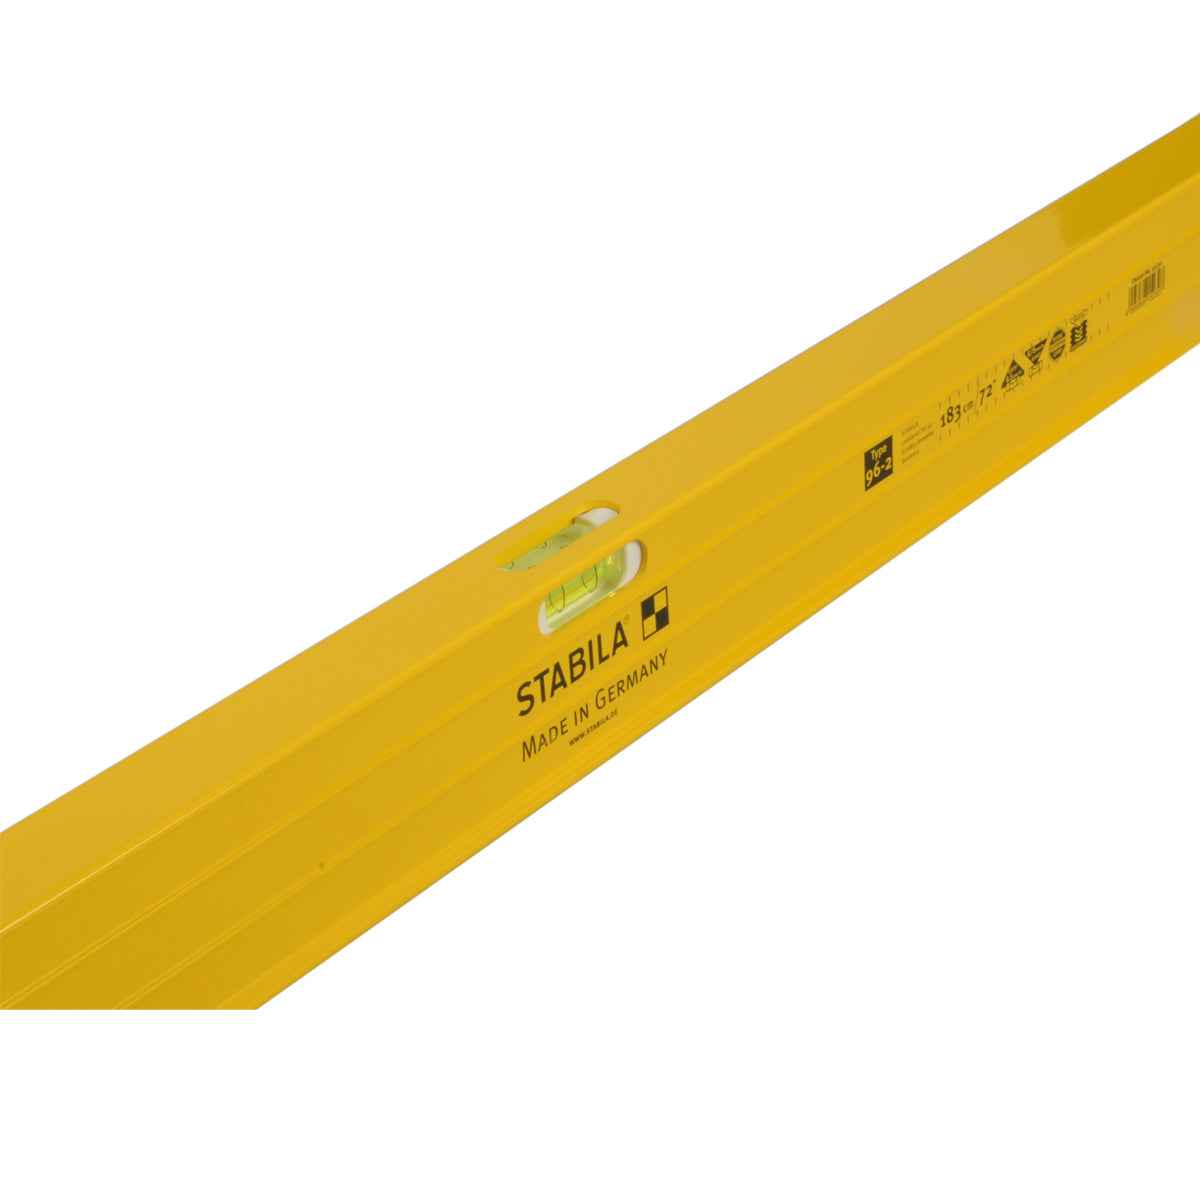 Stabila STB962180 96-2 1800mm/72inch Double Plumb Section Level - 15230